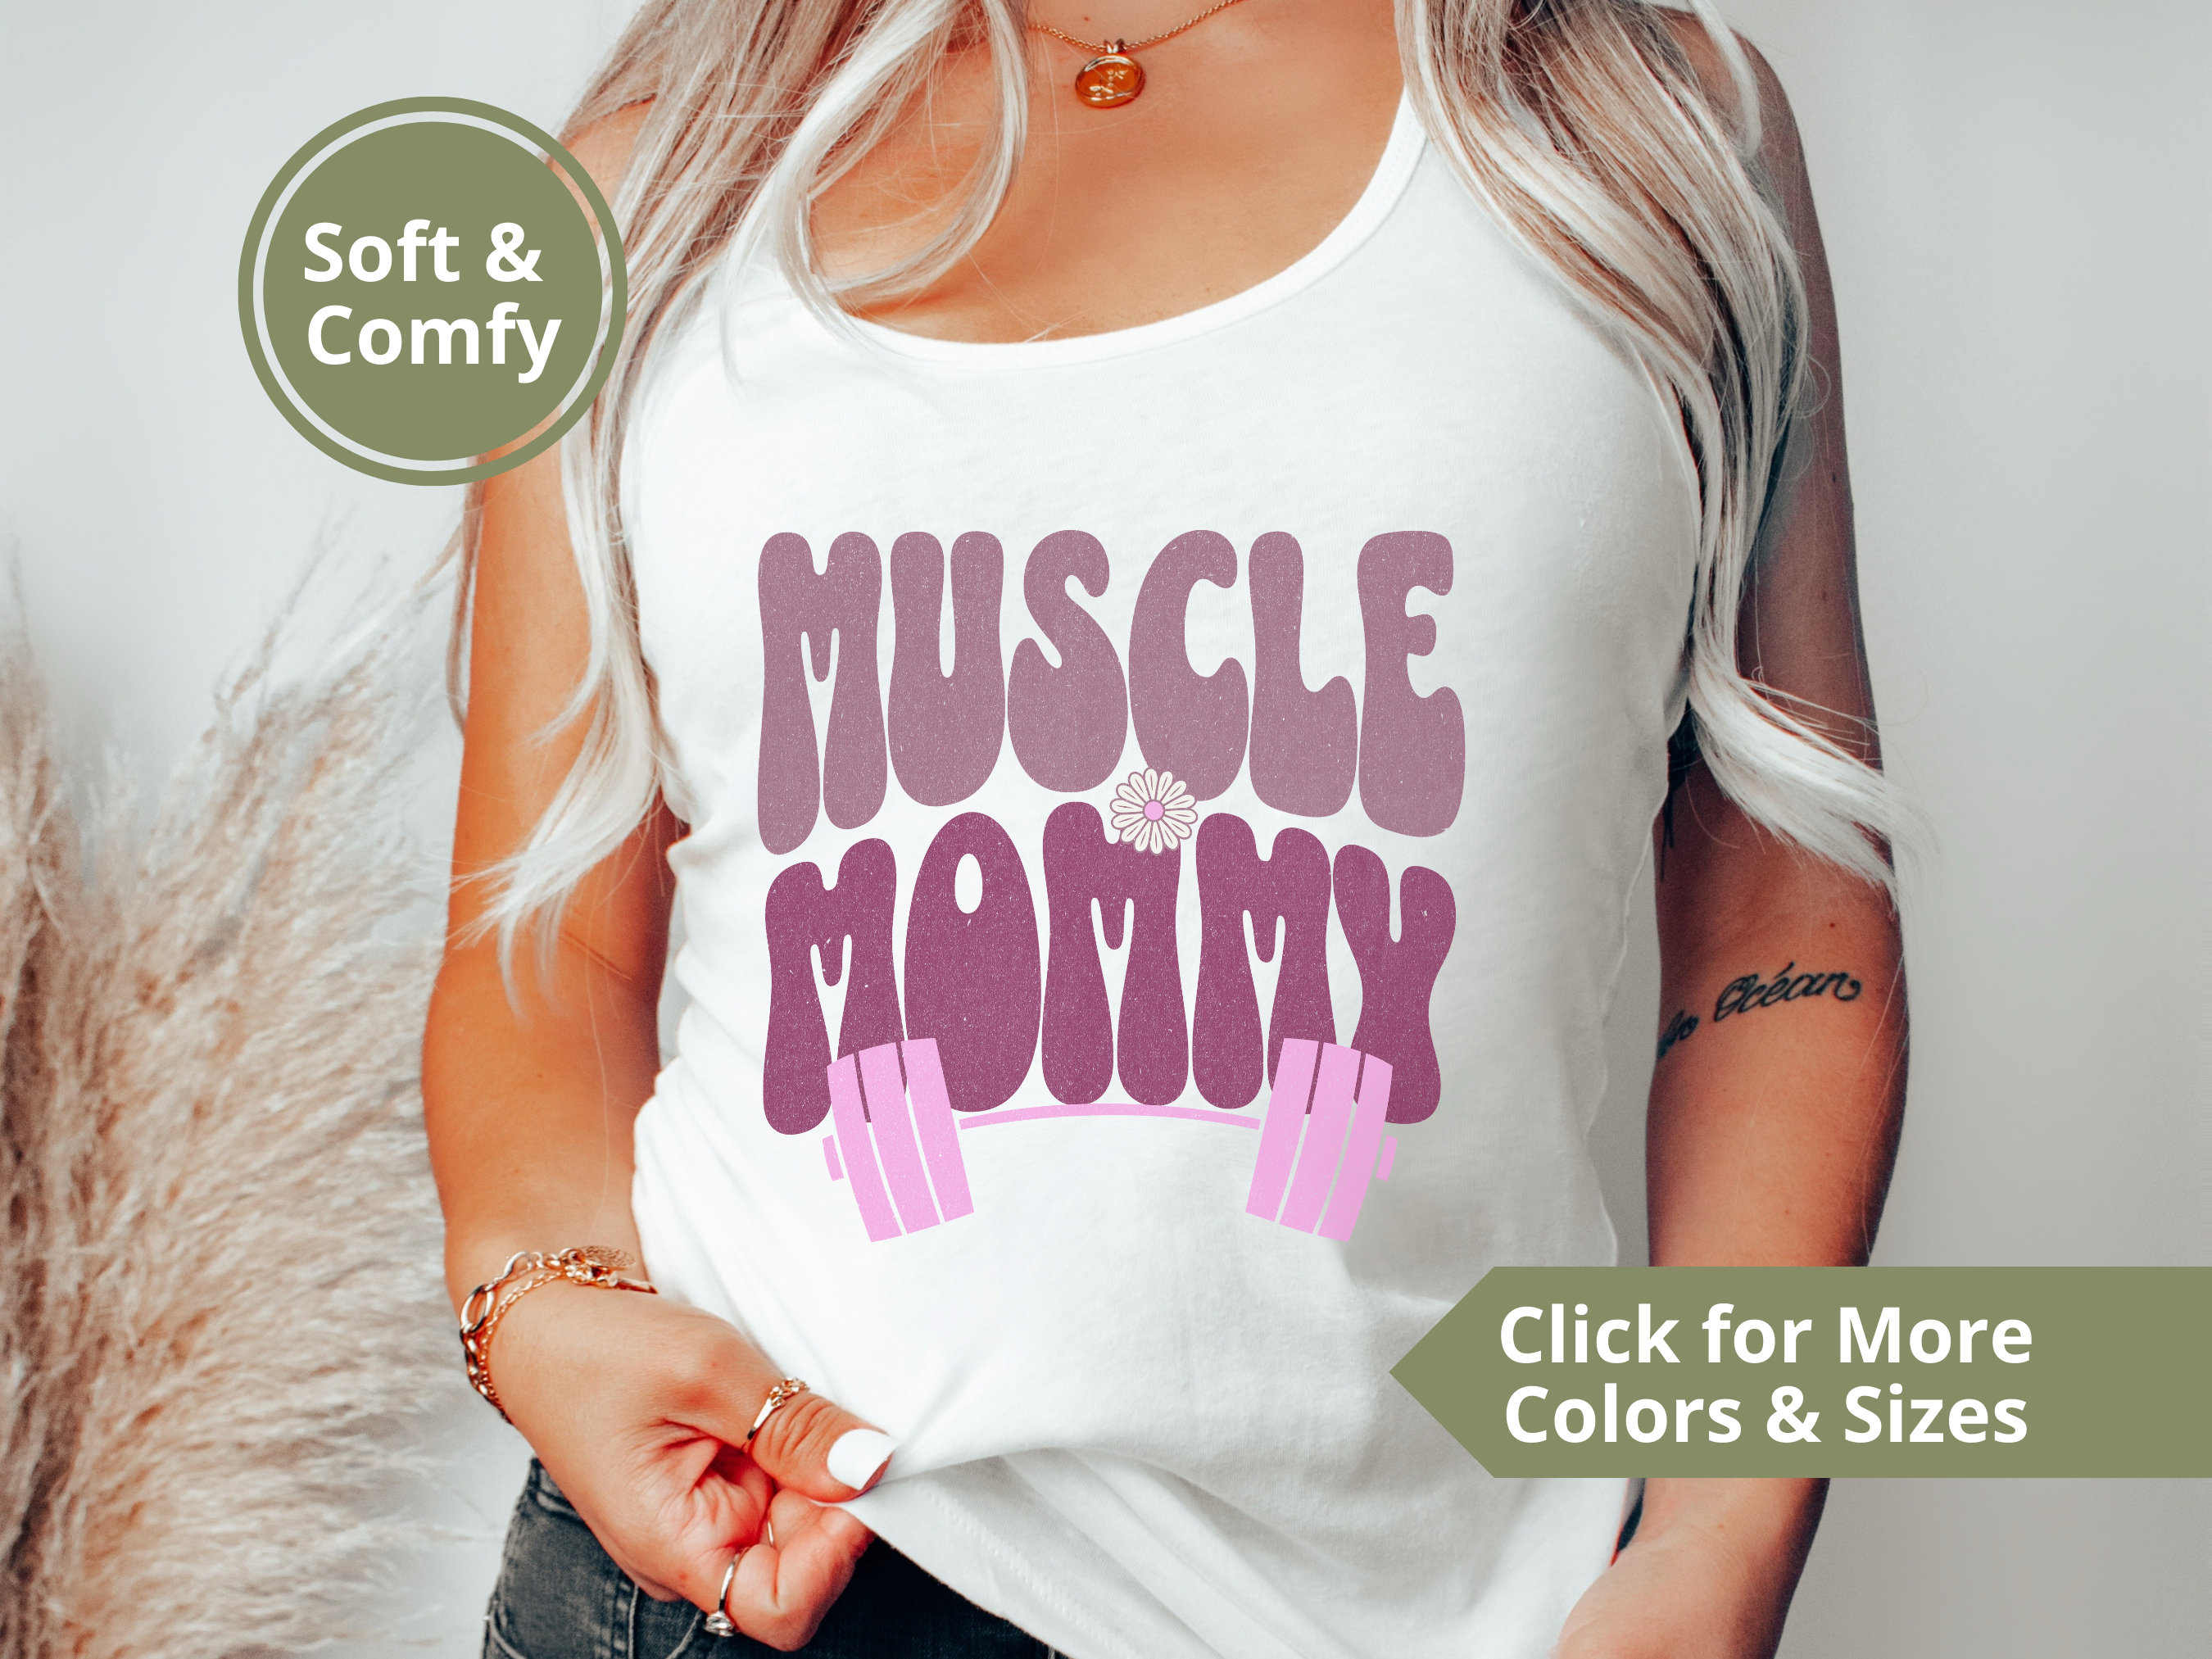 Workout Tank Top Women, Womens Gym Tank, Funny Tank Tops for the Gym, Funny  Workout Shirts, Workout Tanks,i Flexed and the Sleeves Fell Off 